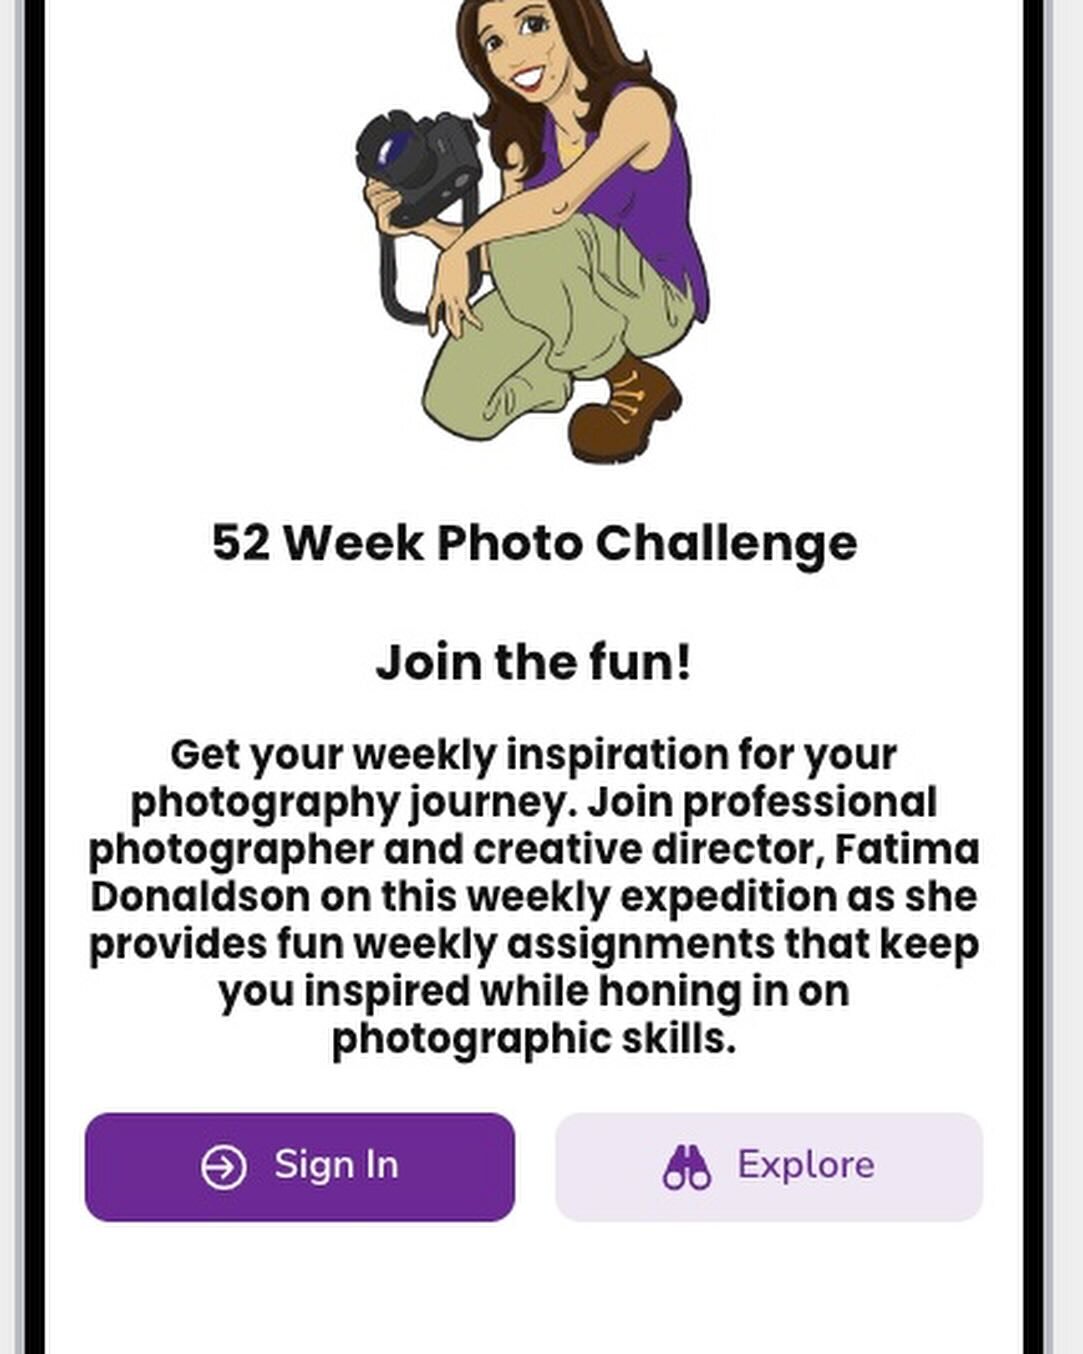 Unleash your inner shutterbug and join the fun! Let&rsquo;s snap some shots and watch your #photography skills go next level! @fatdonpics leads you thru these weekly prompts - #keepcalm and #clickon